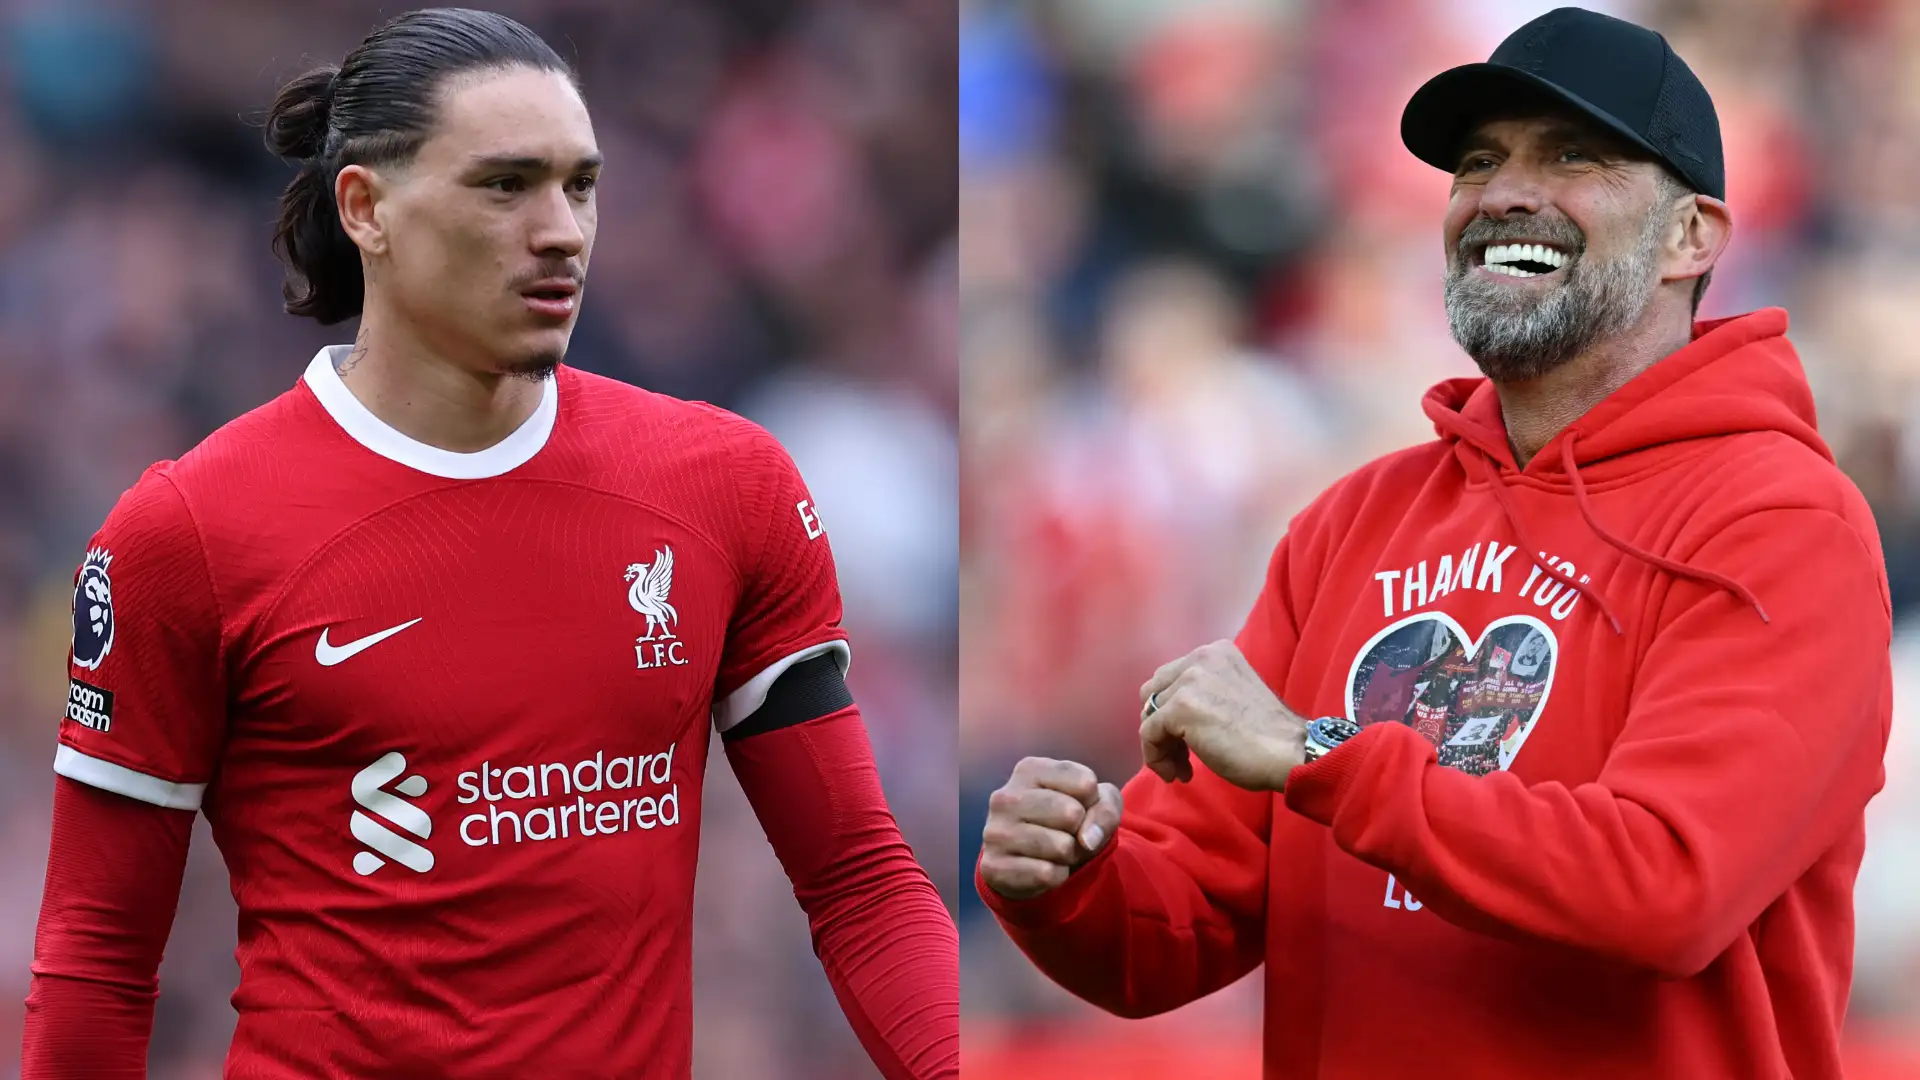 Darwin Nunez finally reveals what he thinks about Jurgen Klopp's Liverpool exit after guard of honour controversy in beloved manager's final game